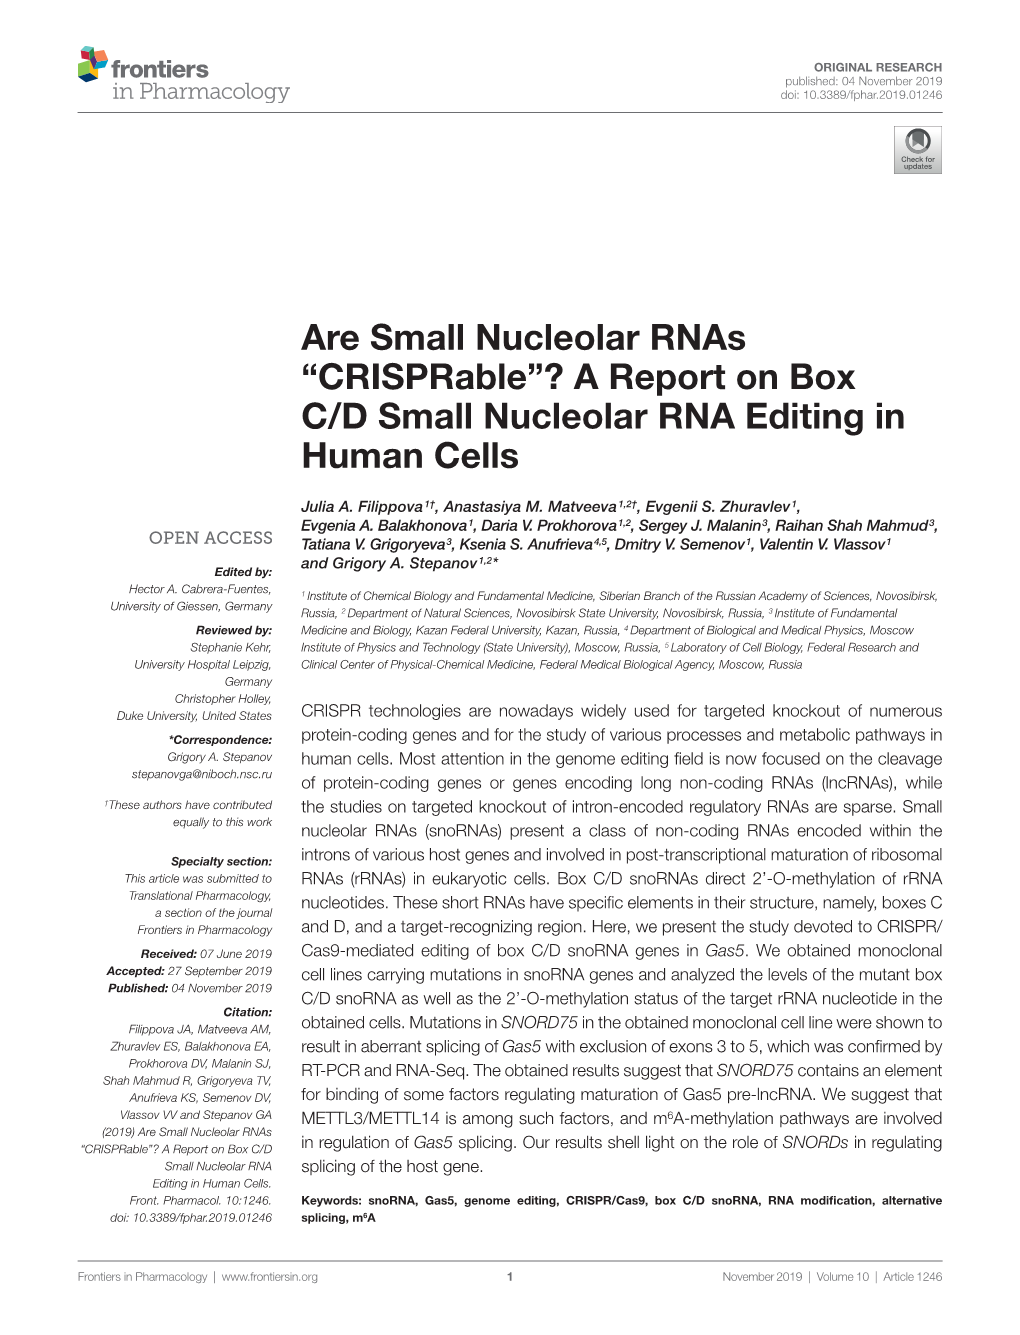 A Report on Box C/D Small Nucleolar RNA Editing in Human Cells